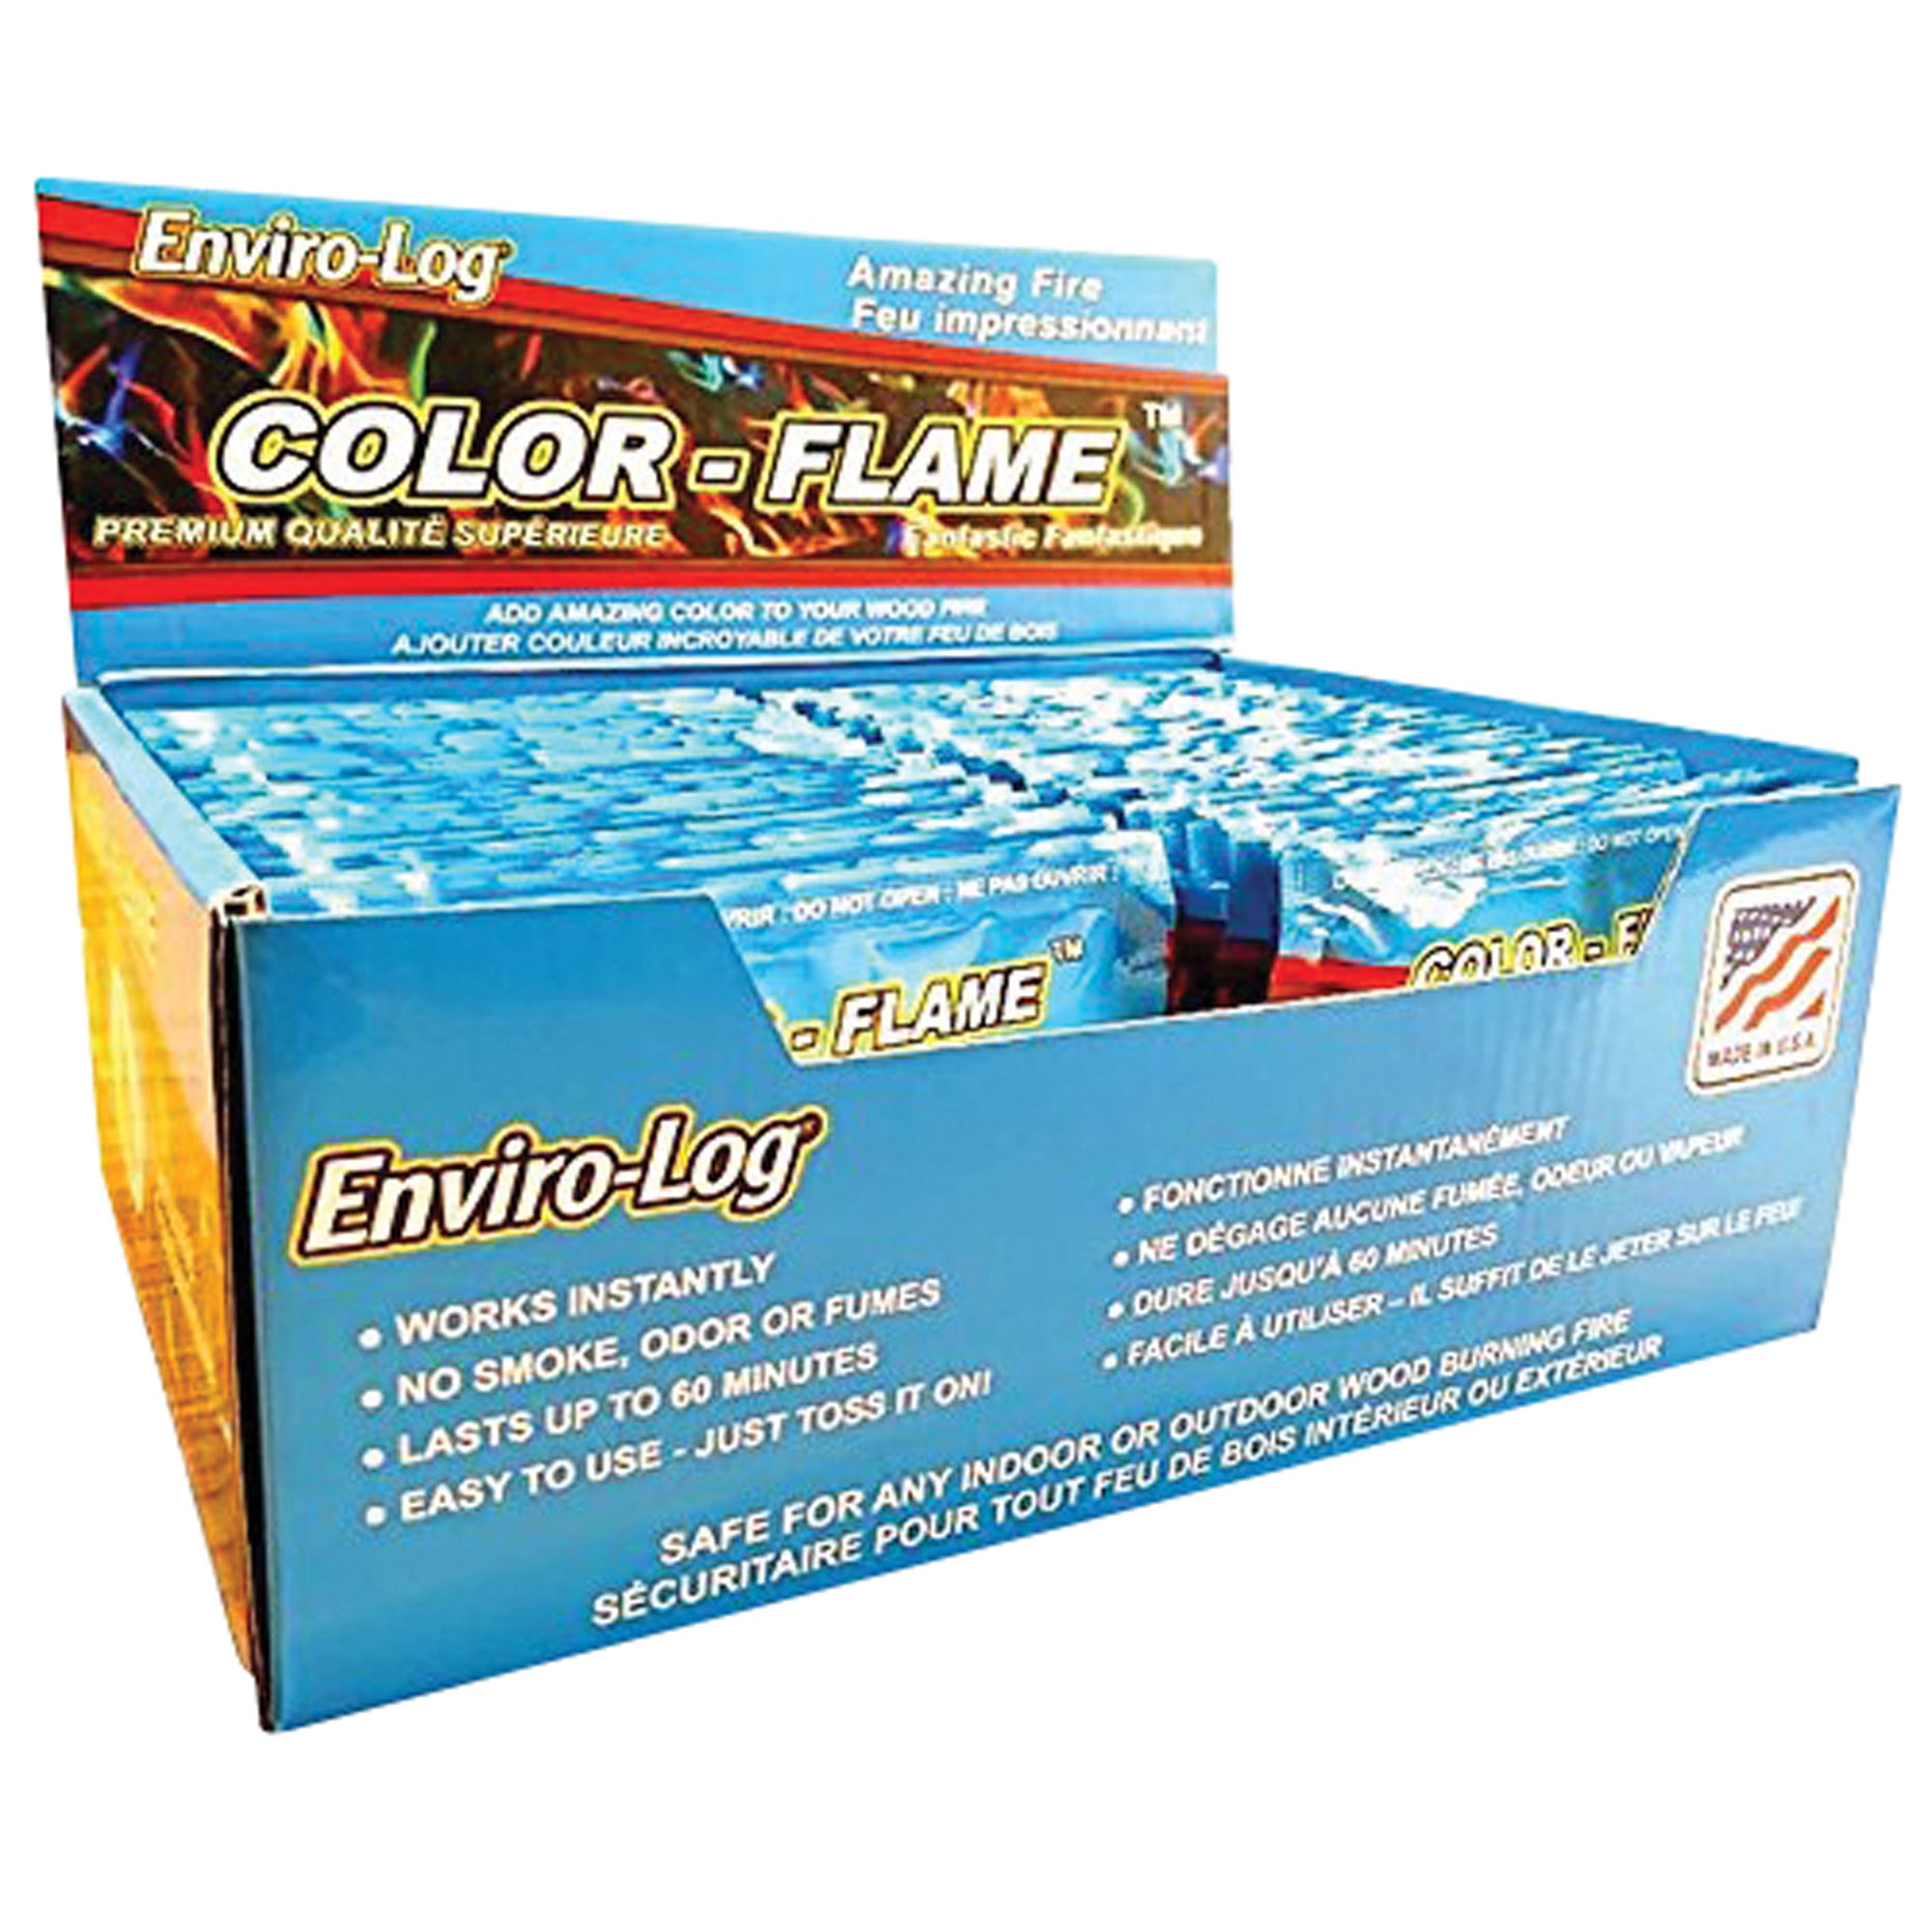 Outdoors Unlimited CFS5800-48 Enviro-Log Color Flame Wood Fire Additive - 48-Pack